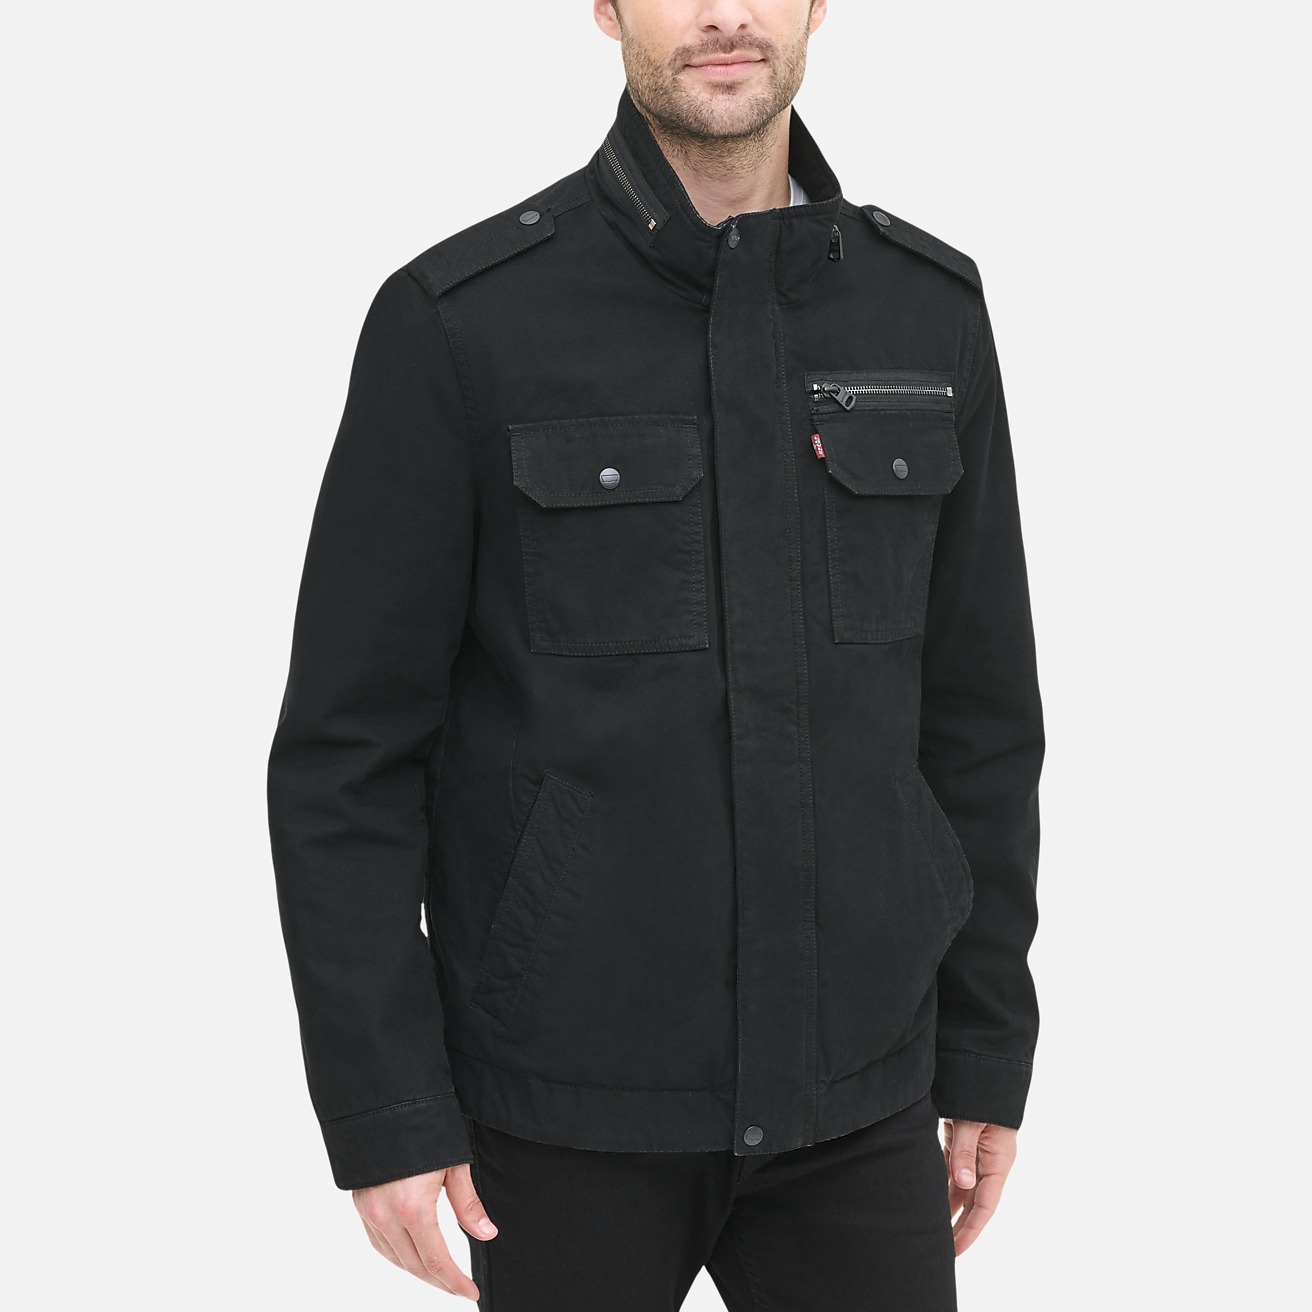 Levi's Modern Fit Washed Cotton Military Jacket, All Sale